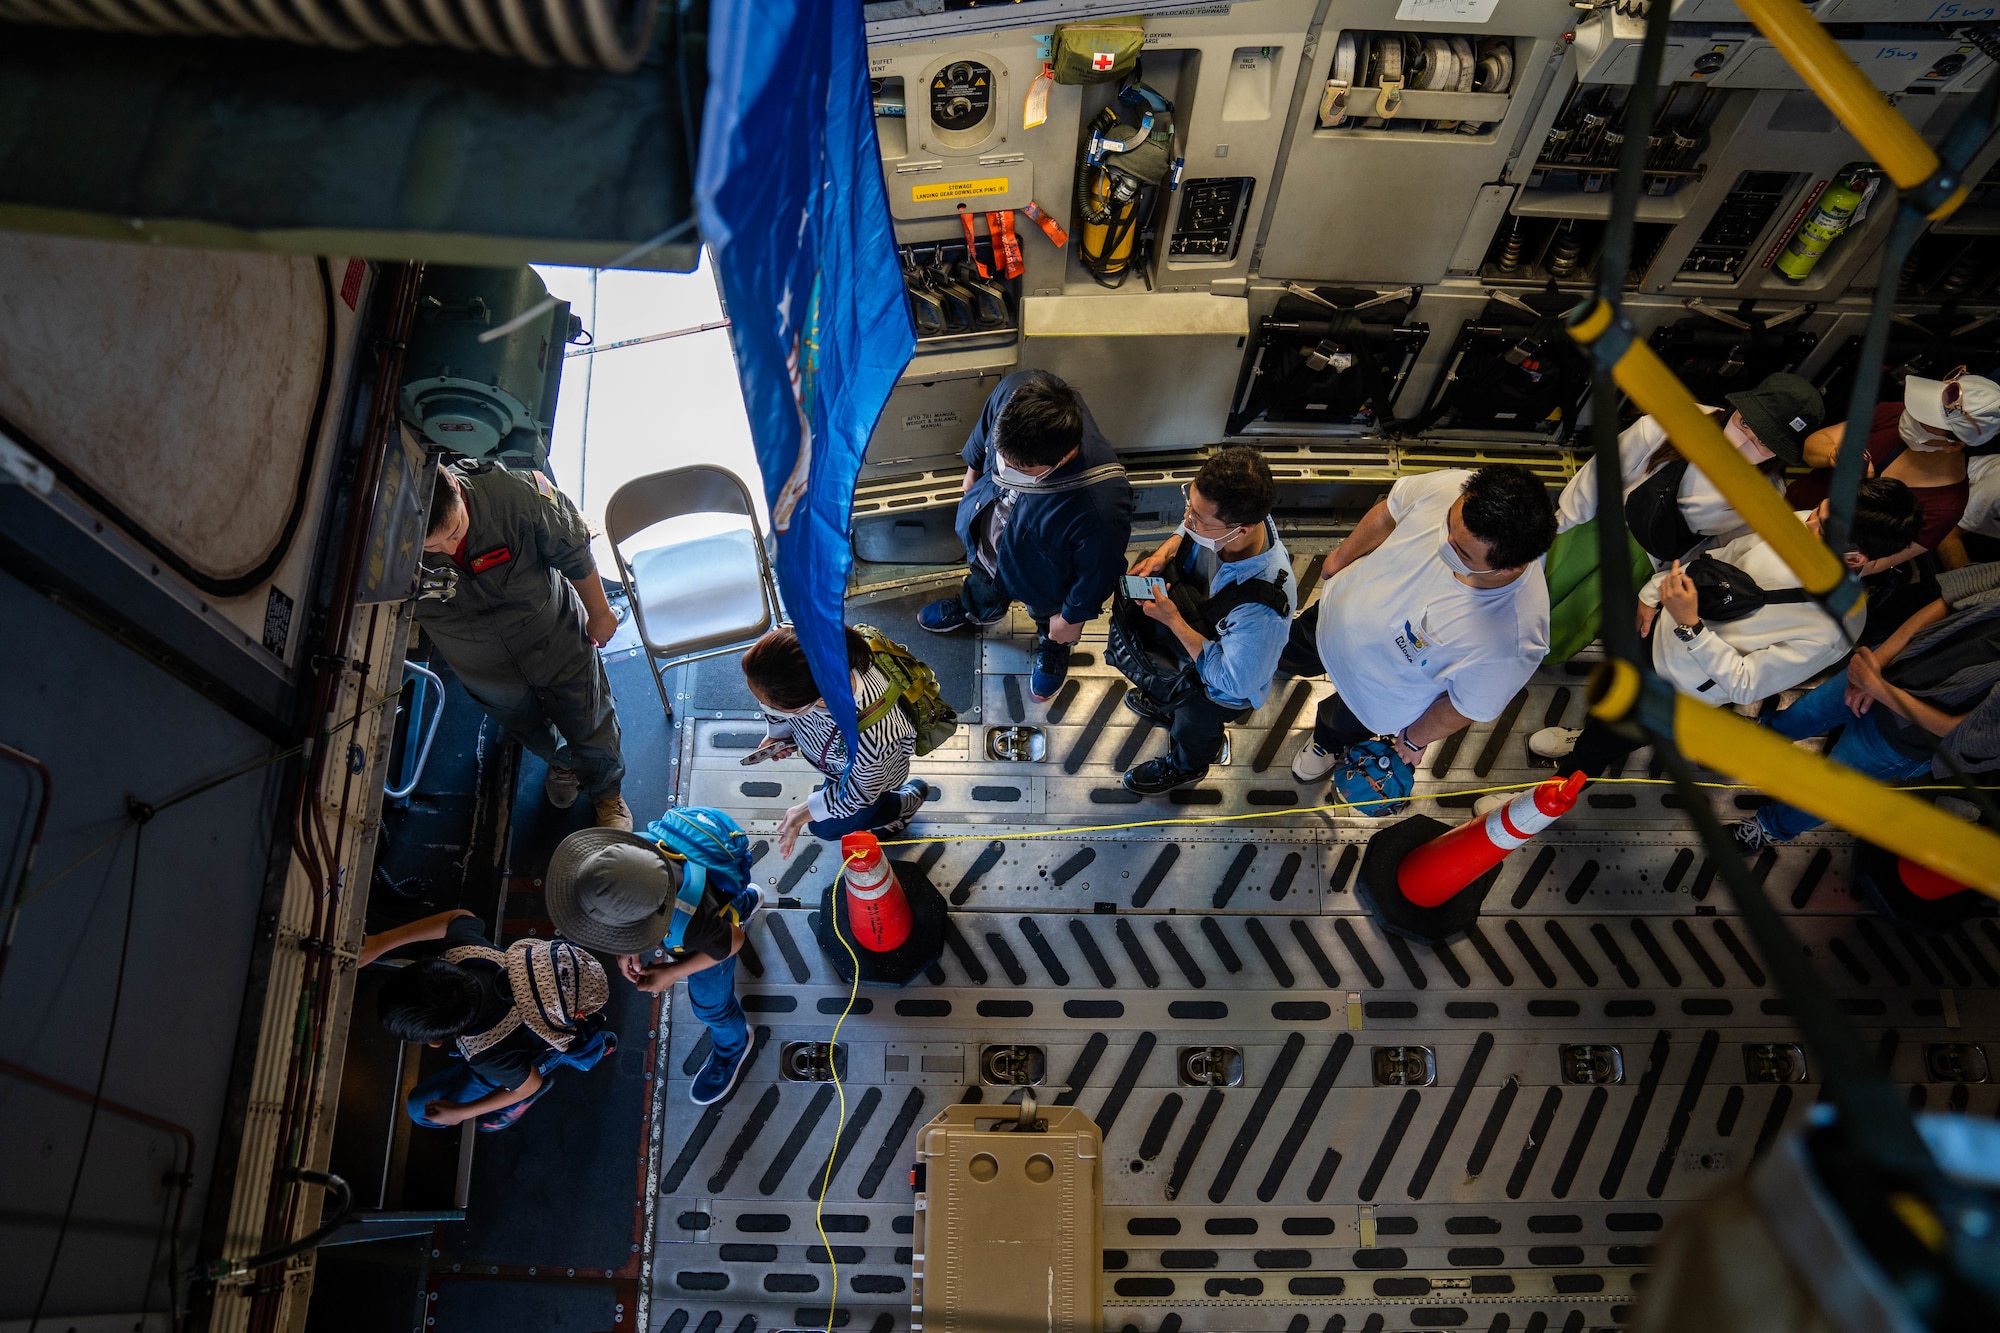 Festival guests tour the inside of a C-17 Globemaster III during the Friendship Festival 2022 at Yokota Air Base, Japan, May 22, 2022. The festival embodied the true spirit of friendship, welcoming more than 110,000 Japanese neighbors to meet with our Airmen and tour static displays of U.S and Japanese Aircraft while sharing our cultures and stories. (U.S. Air Force photo by Airman 1st Class Makensie Cooper)